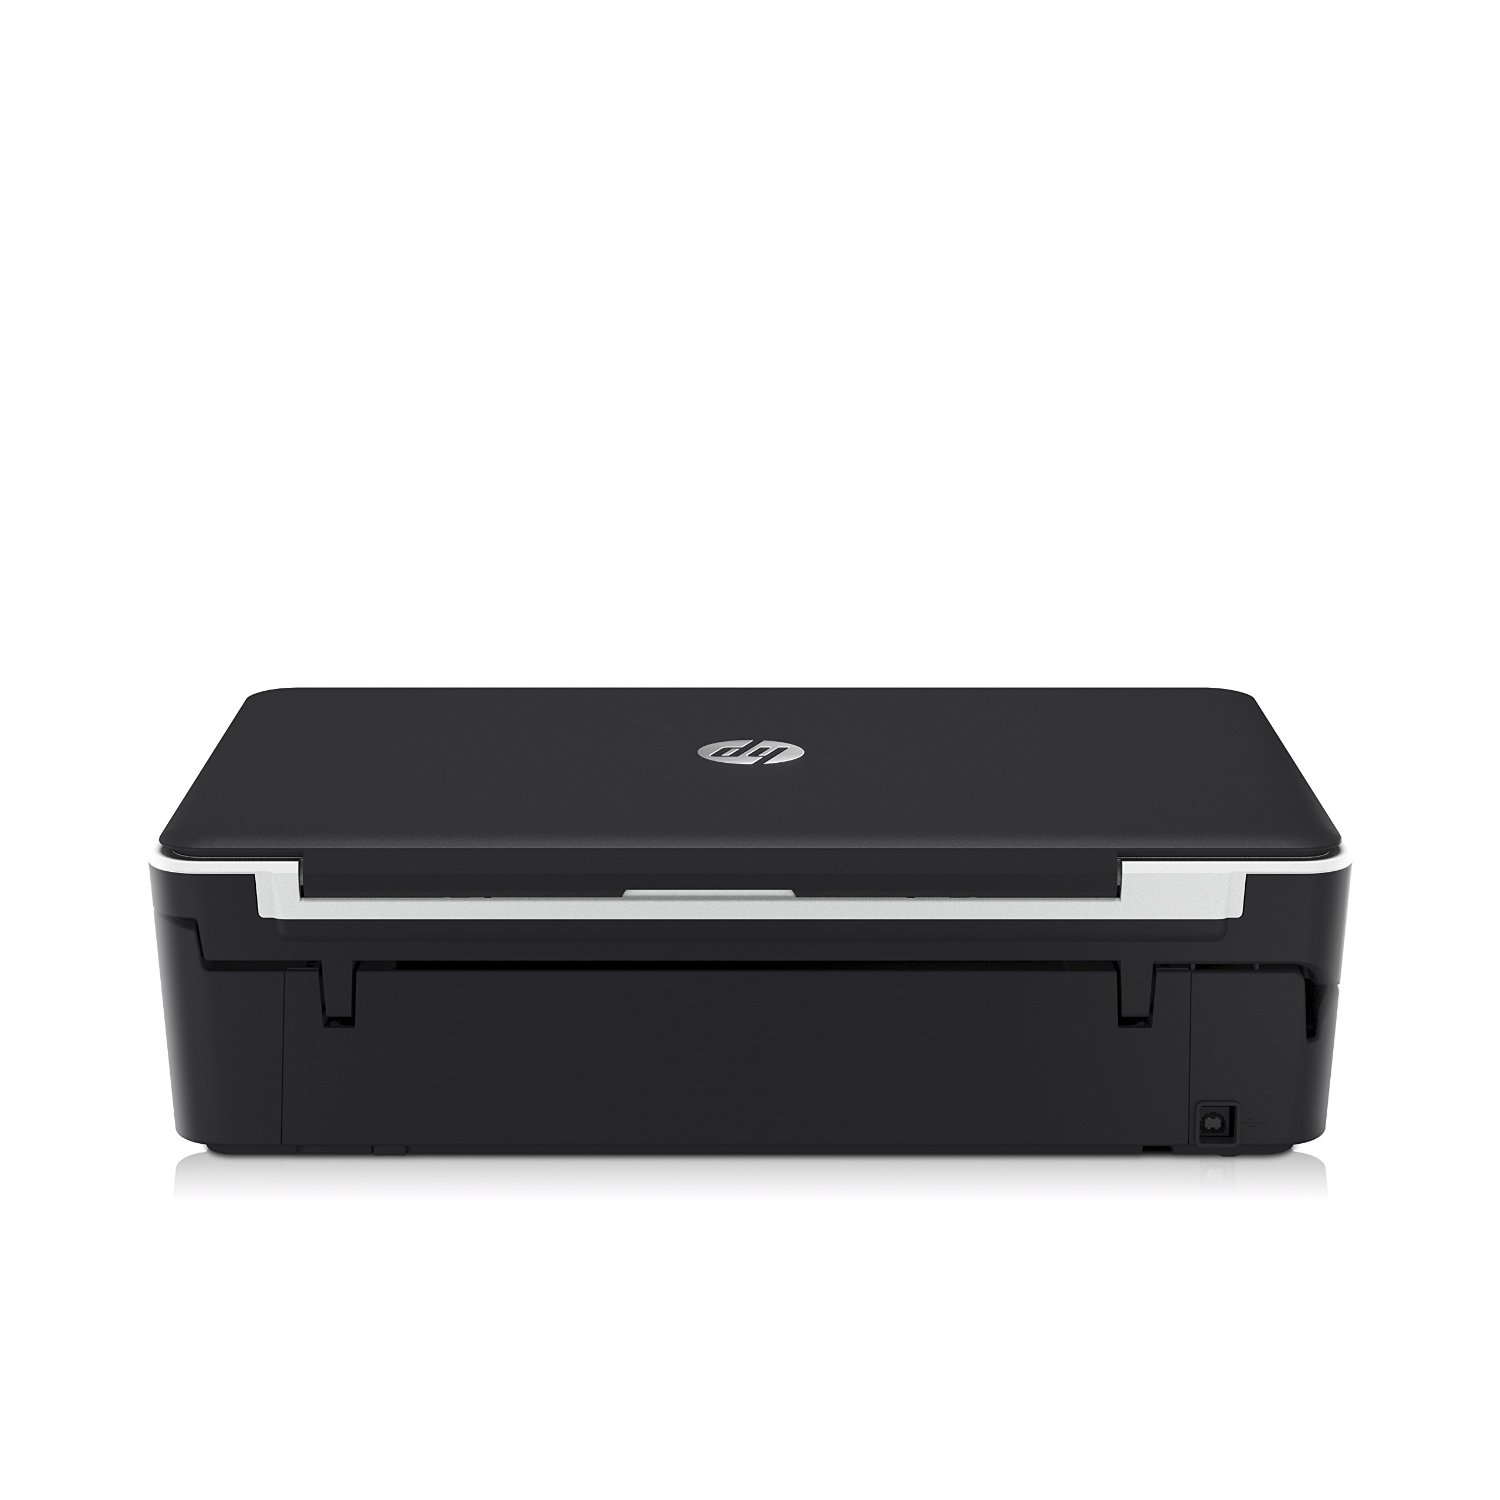 Hp Envy 5534 Wireless All In One Color Photo Printer N3 Free Image Download 7252